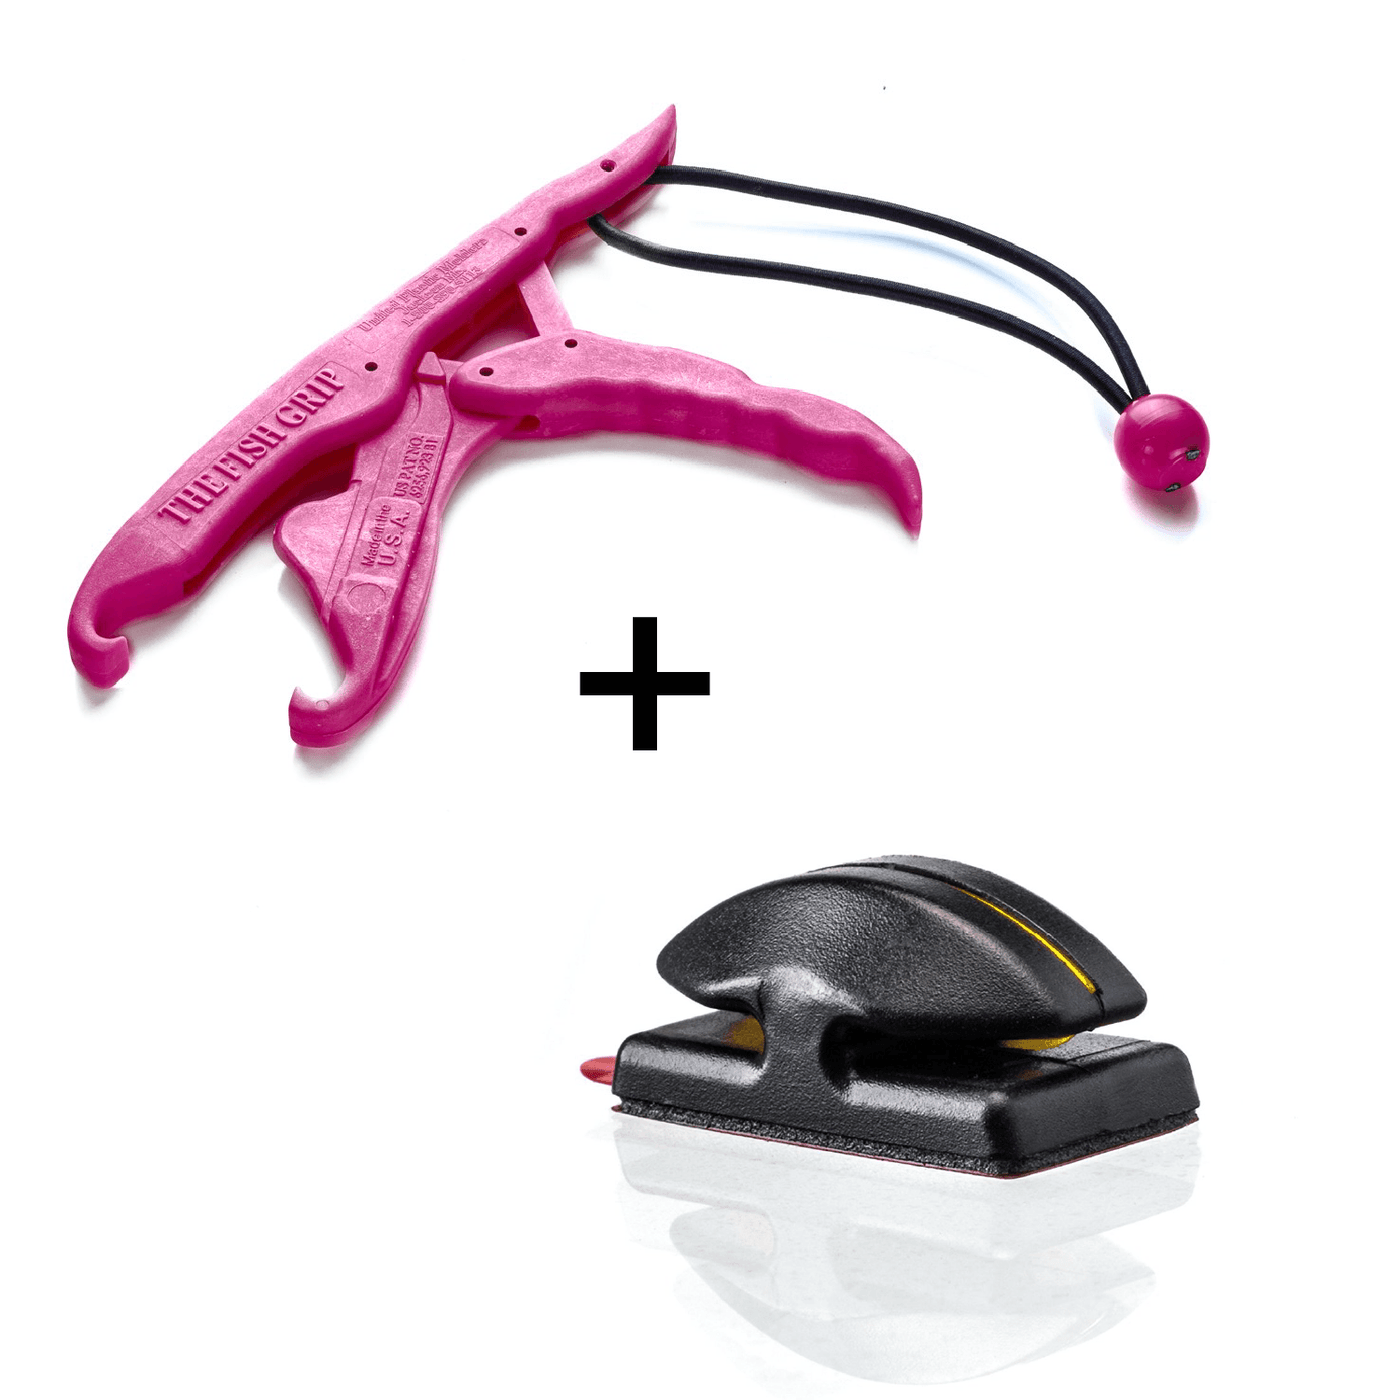 COMBO DEAL - "Limited Edition" Line Cutterz Flat Mount + Lunker Tamers by The Fish Grip Combo Cutter Line Cutterz Pink 